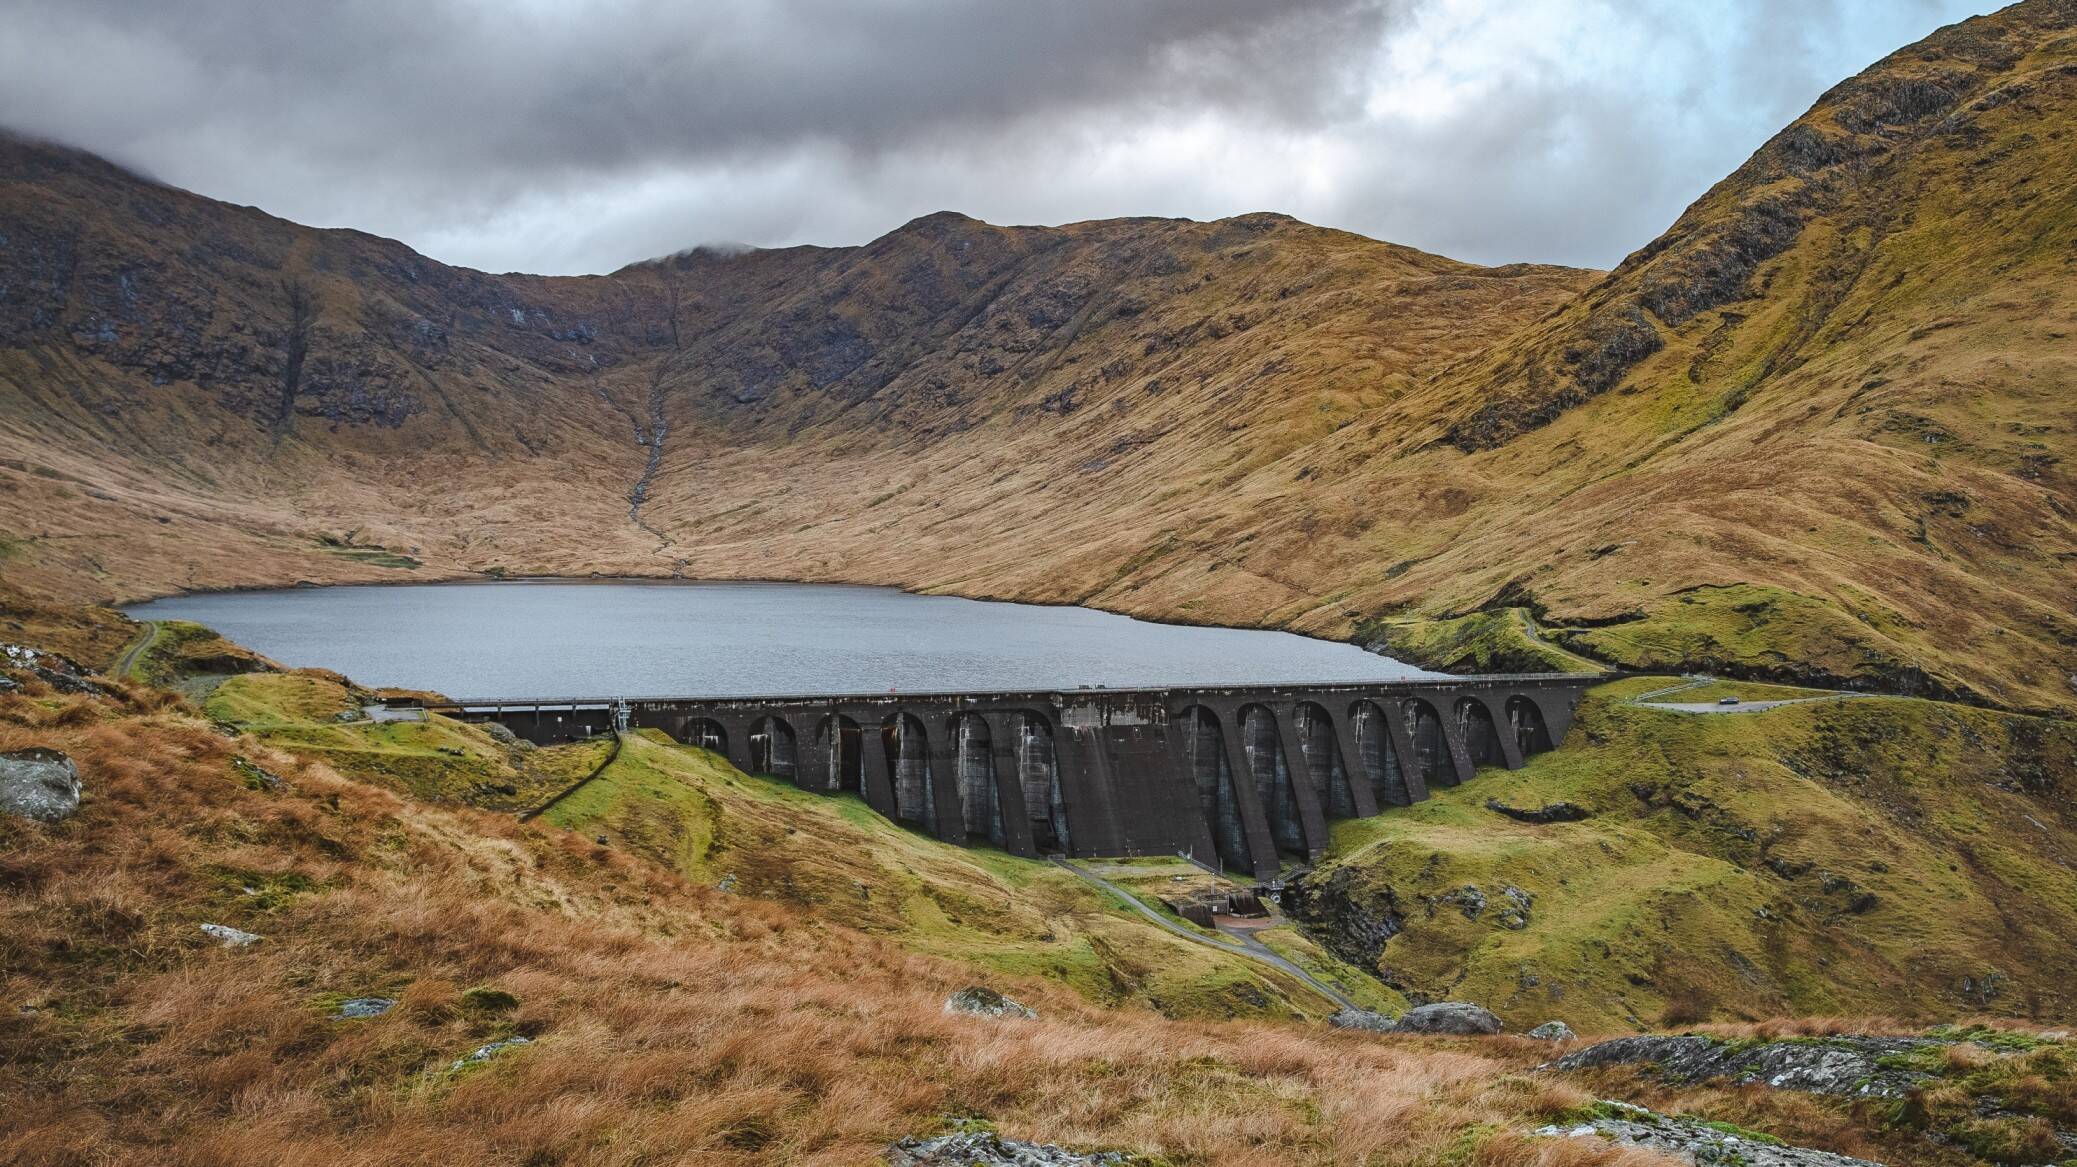 Drax submits application to expand Cruachan ‘hollow mountain’ power station